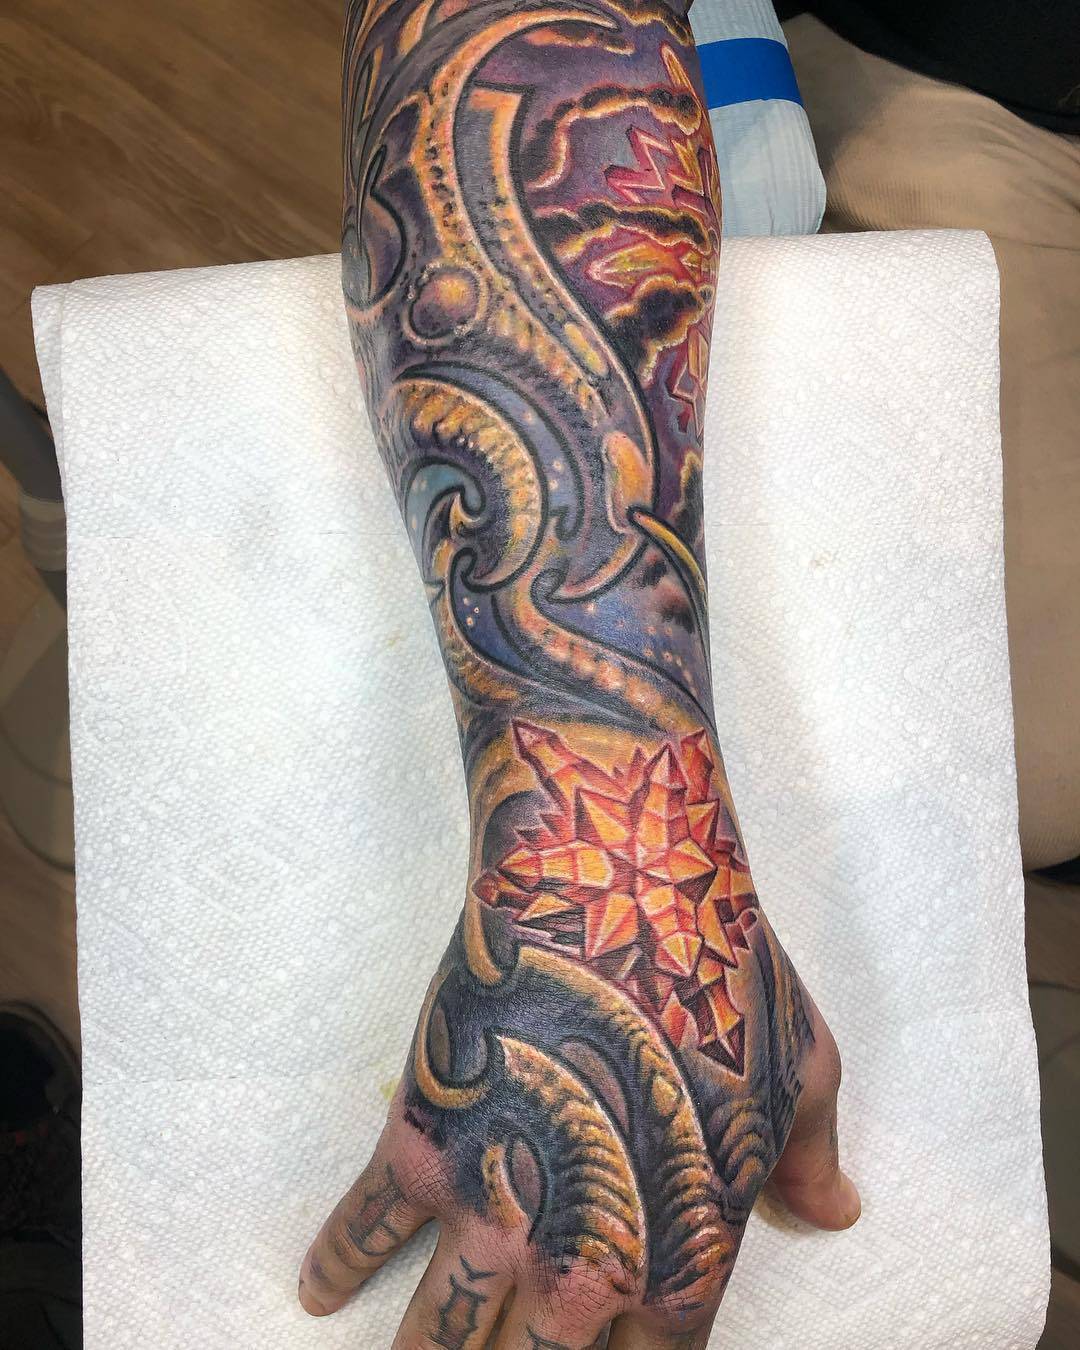 20 Of The Best Biomechanical Tattoos For Men in 2023  FashionBeans